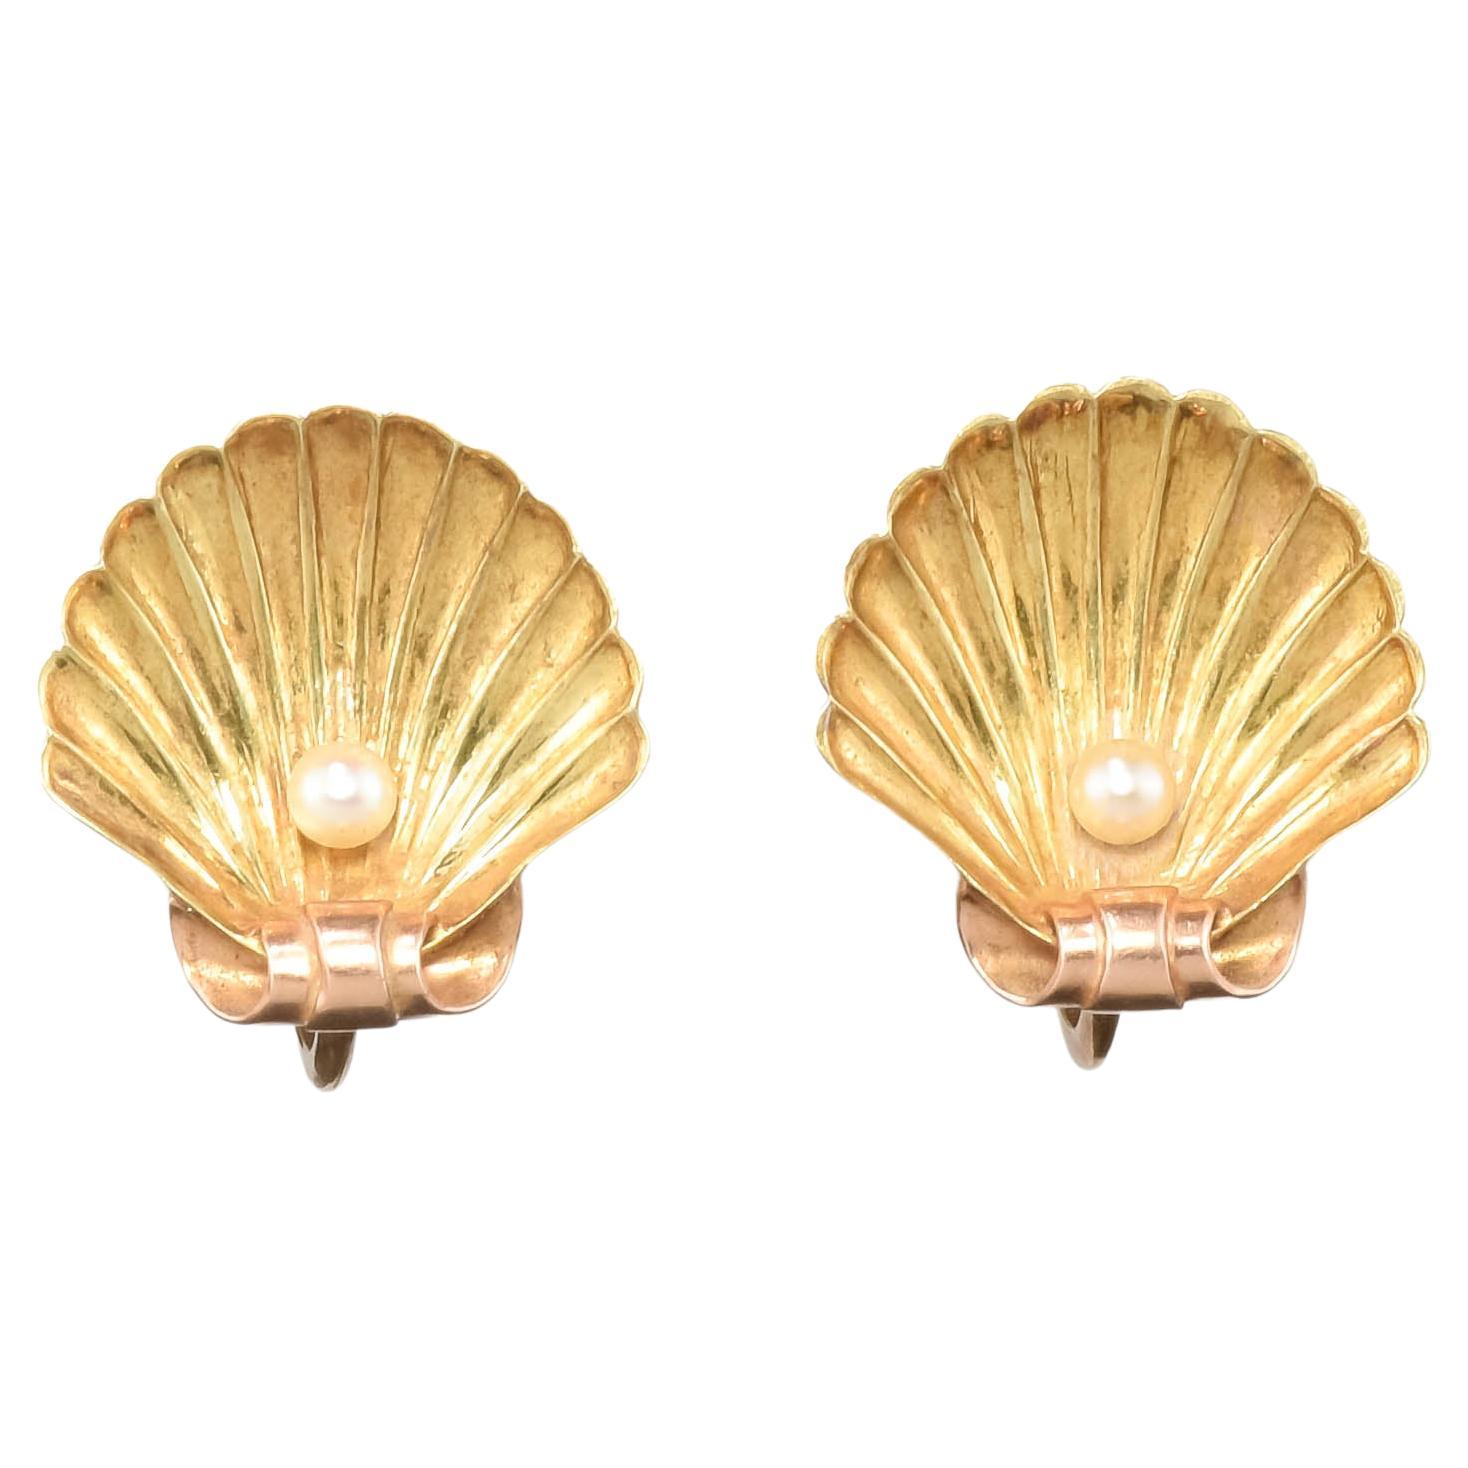 Antique 14K Gold Shell Earrings w Pearls by Sloan & Co. French Screw Back Style For Sale